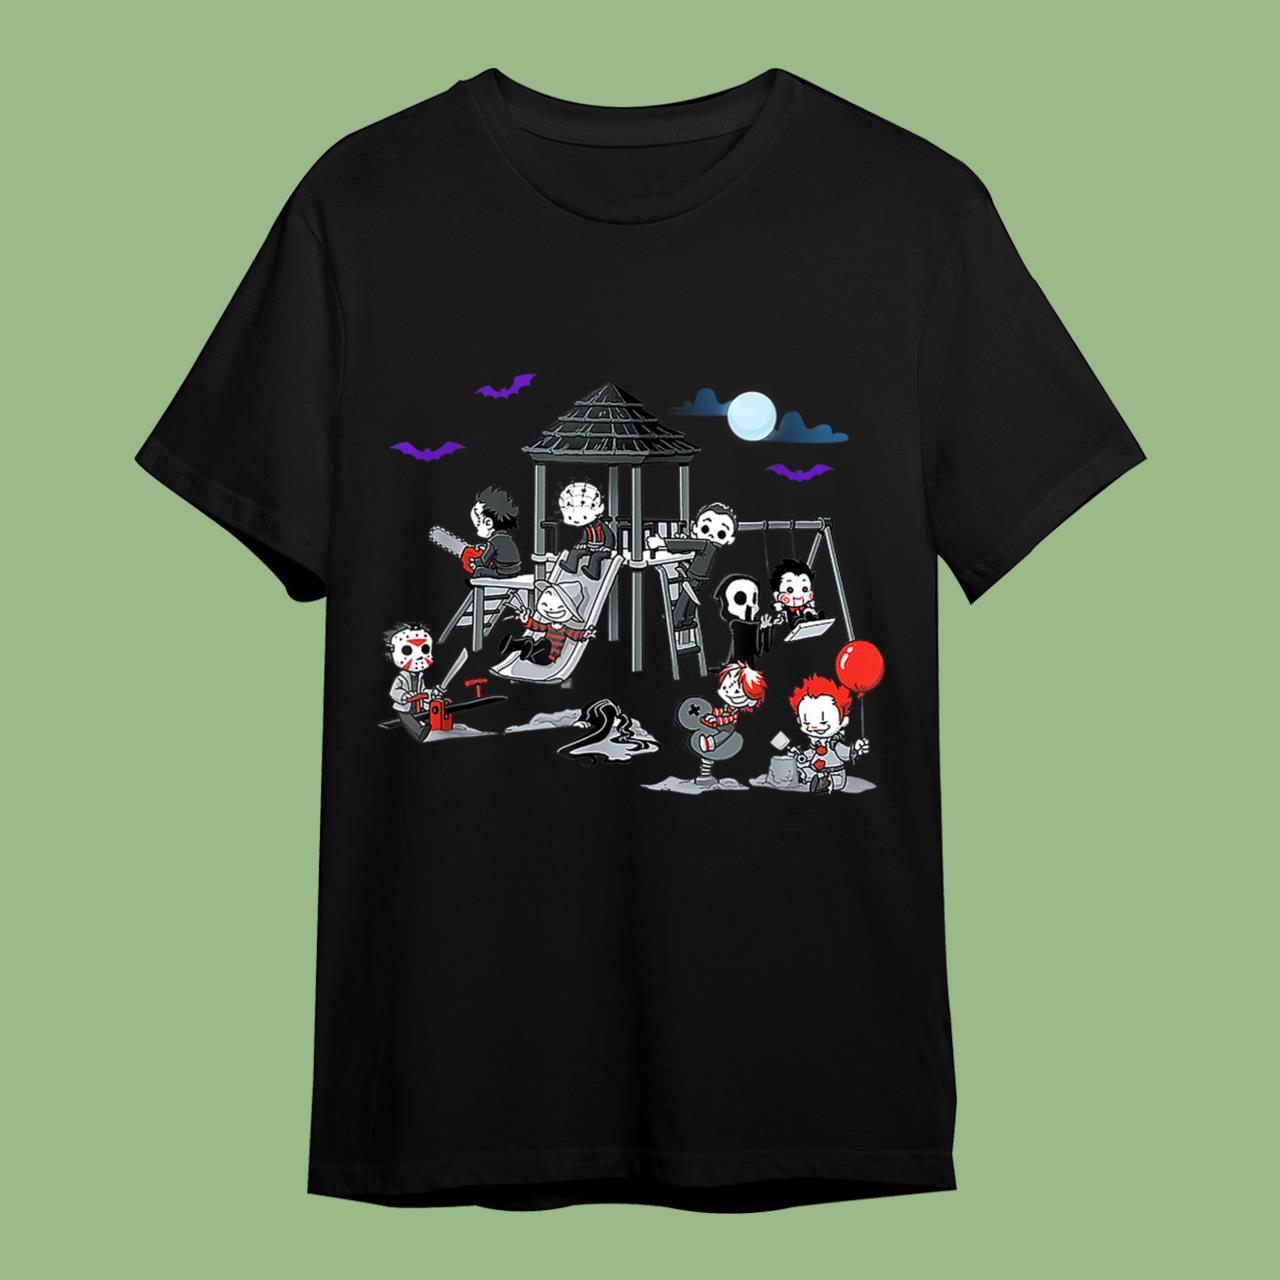 Skitongift Horror Clubhouse In Park Halloween T-Shirt